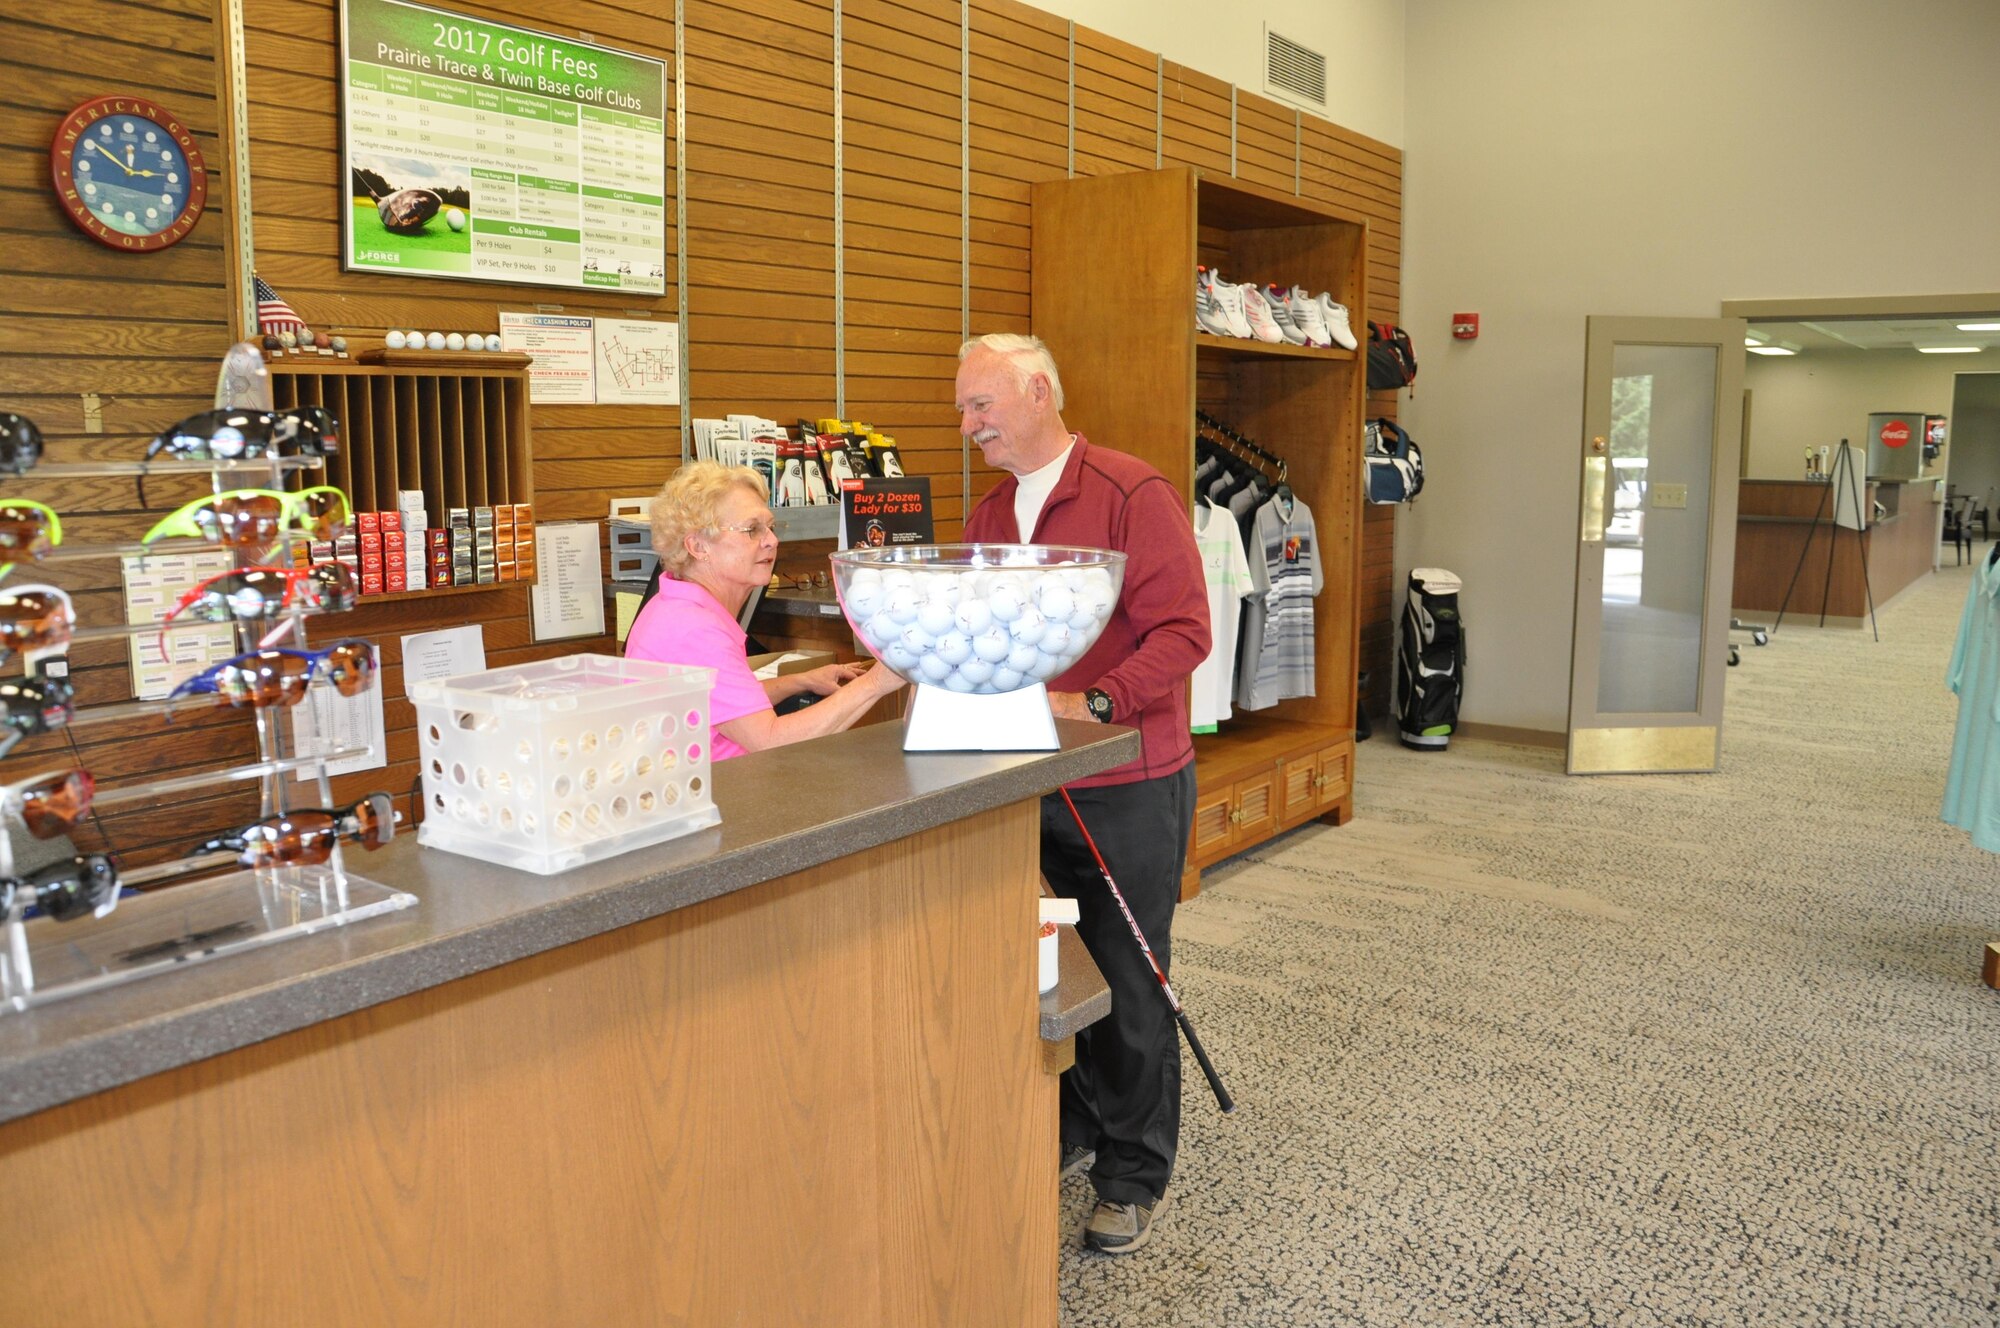 Roger Smith of Beavercreek, Ohio, talks with Customer Service Representative Gail Longo about a new driver at the Twin Base golf course April 10, 2017. The clubhouse facility was upgraded with new carpet, display racks, and snack bar furniture. The upgrades began in January 2017 and were completed in March 2017. Officials are also hoping to refurbish the sand traps on the course within the next year, similar to the project that was recently completed on the Prairie Trace golf course. (U.S. Air Force photo/Jim Mitchell)